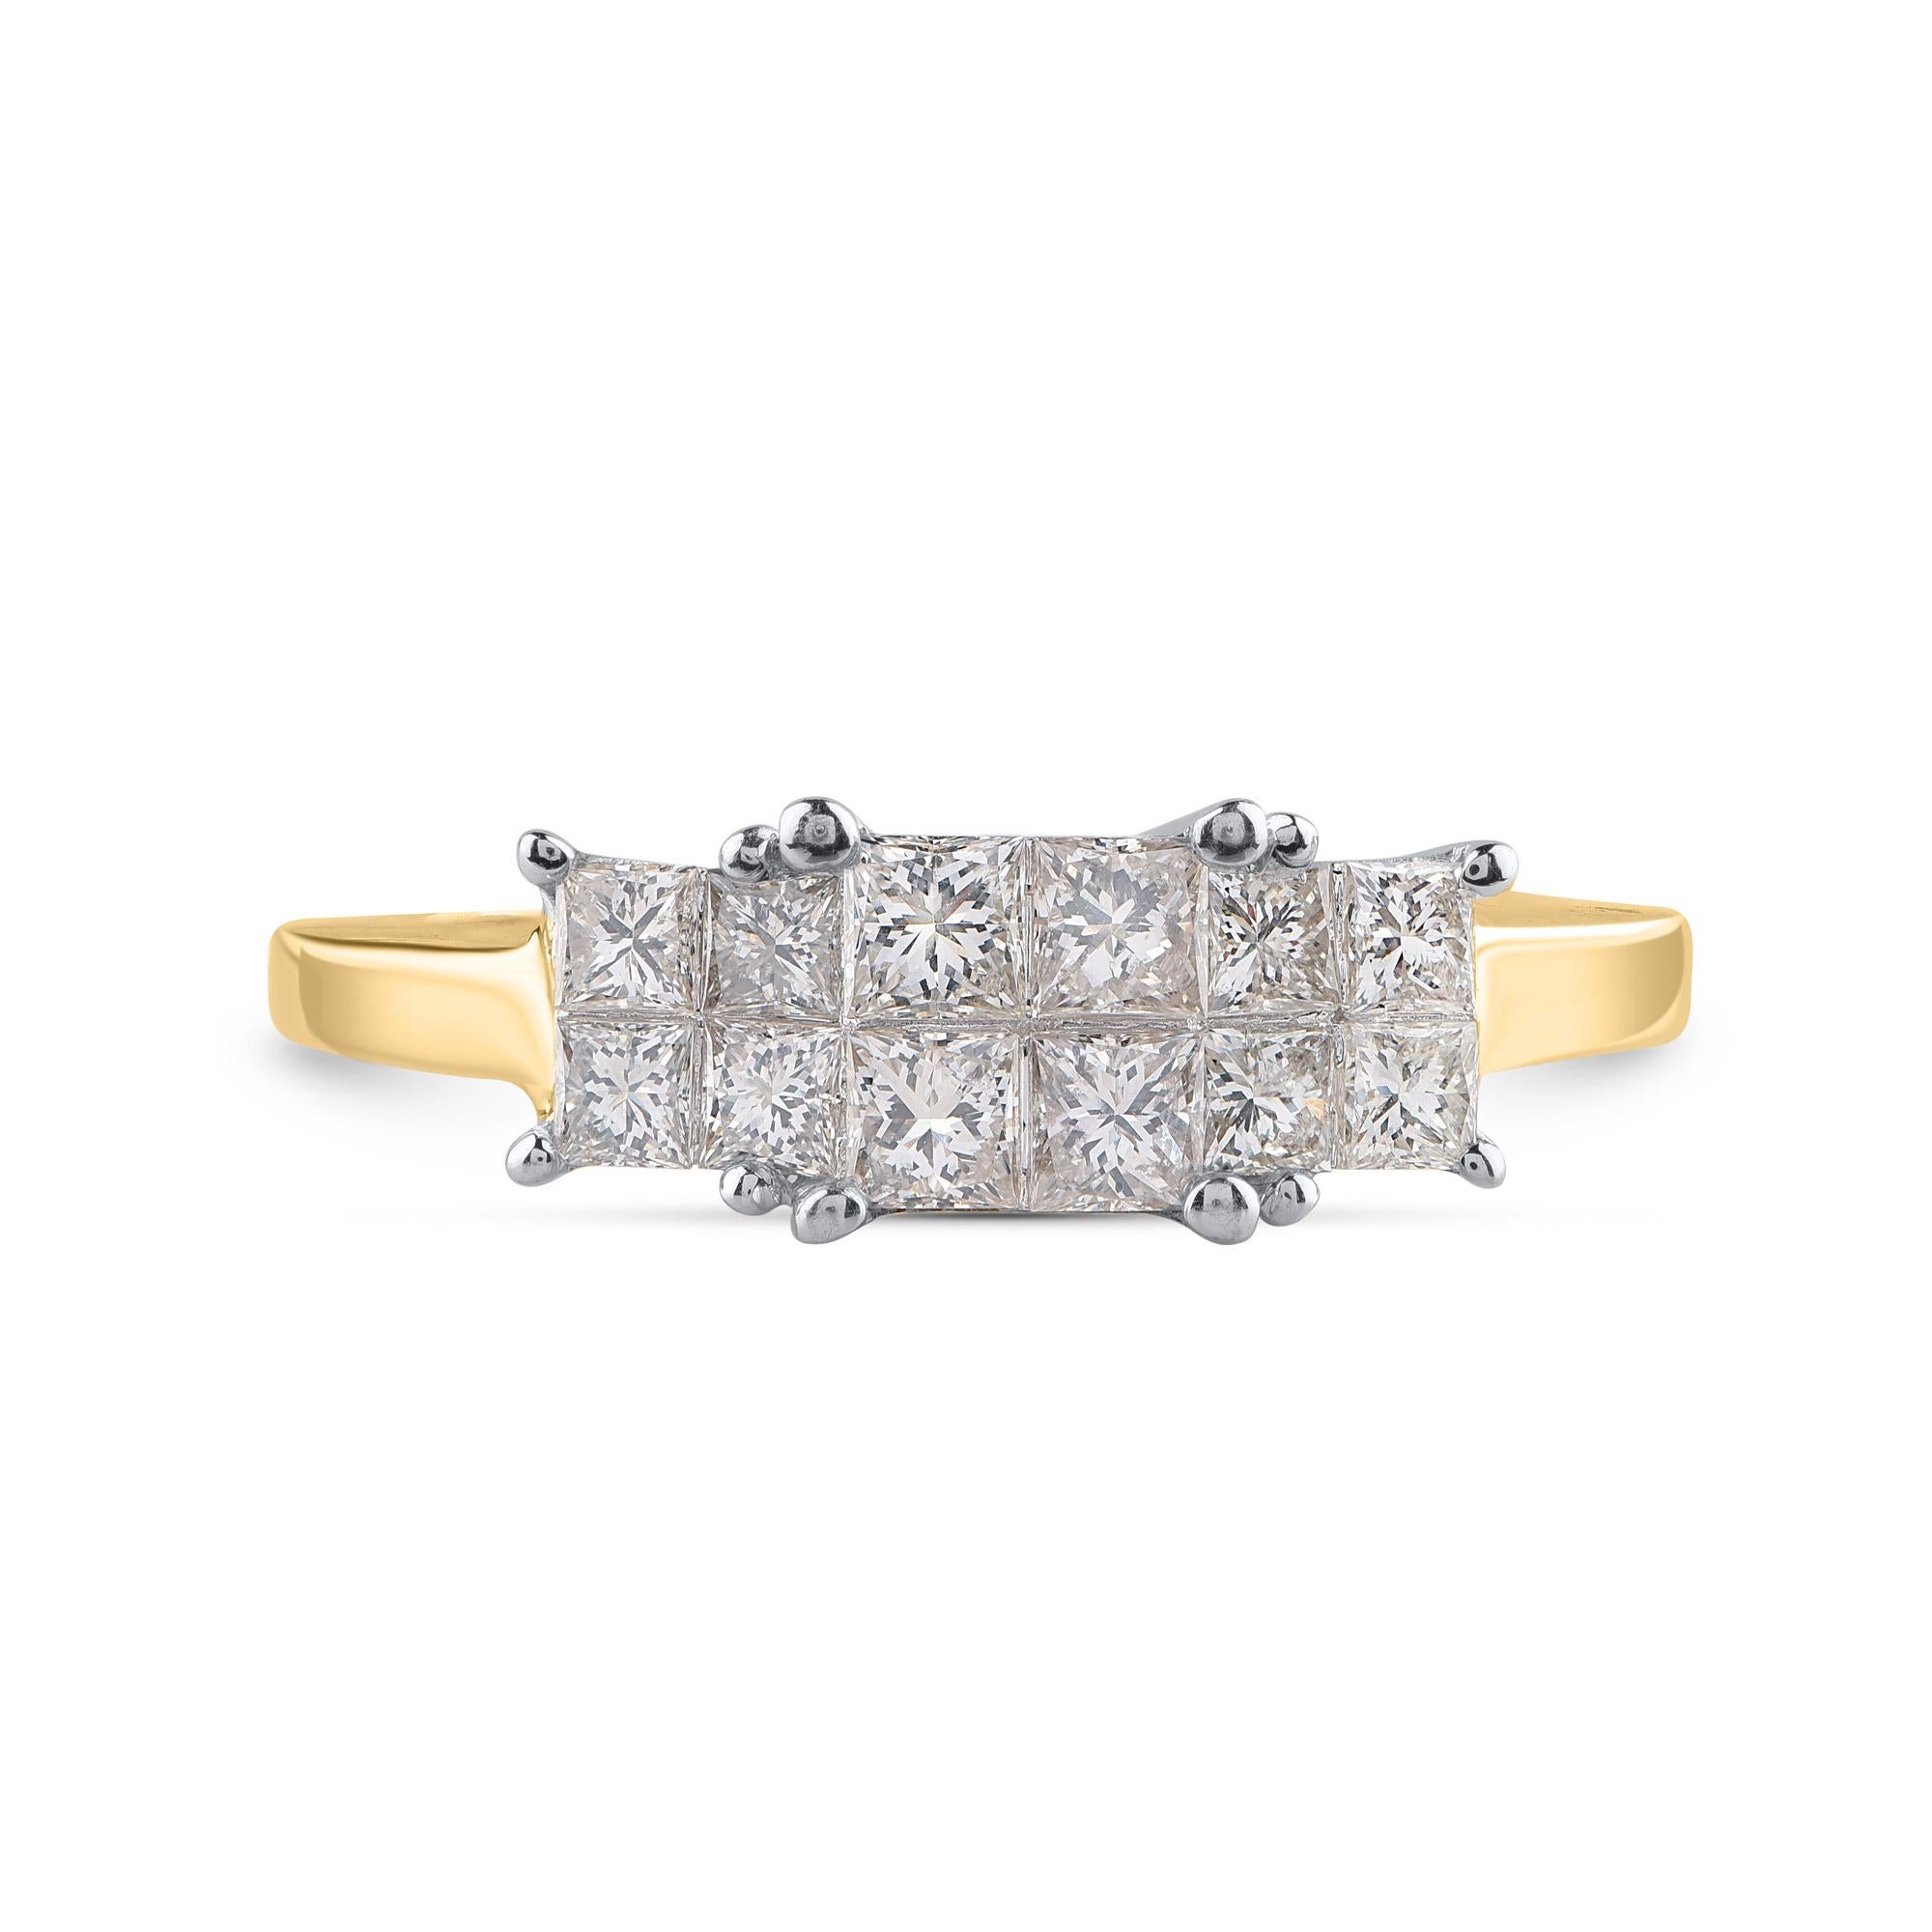 Bring charm to your look with this diamond wedding ring. The ring is crafted from 14 karat gold in your choice of white, rose, or yellow, and embedded with 12 natural princess cut diamonds in PRN Invisible setting. Total diamond weight is 1.0 carat.